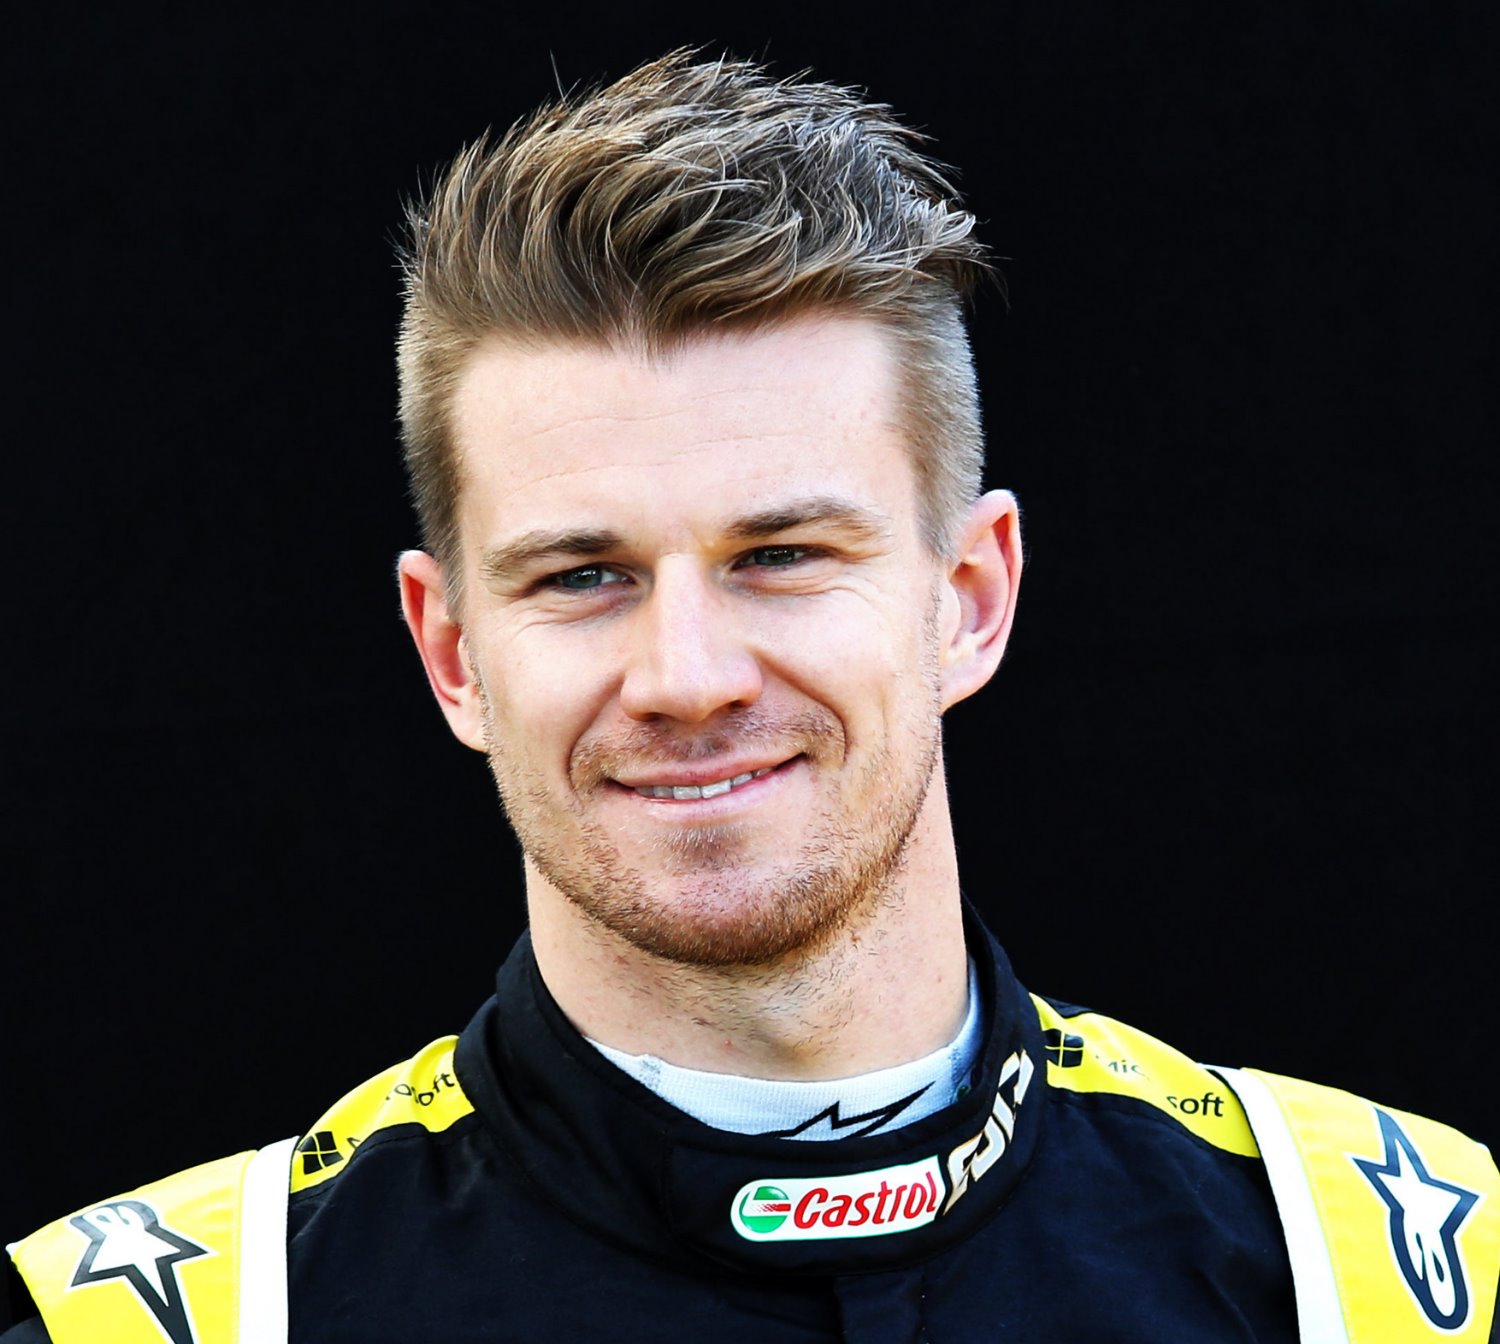 Nico Hulkenberg - so many years in F1 and not a single podium